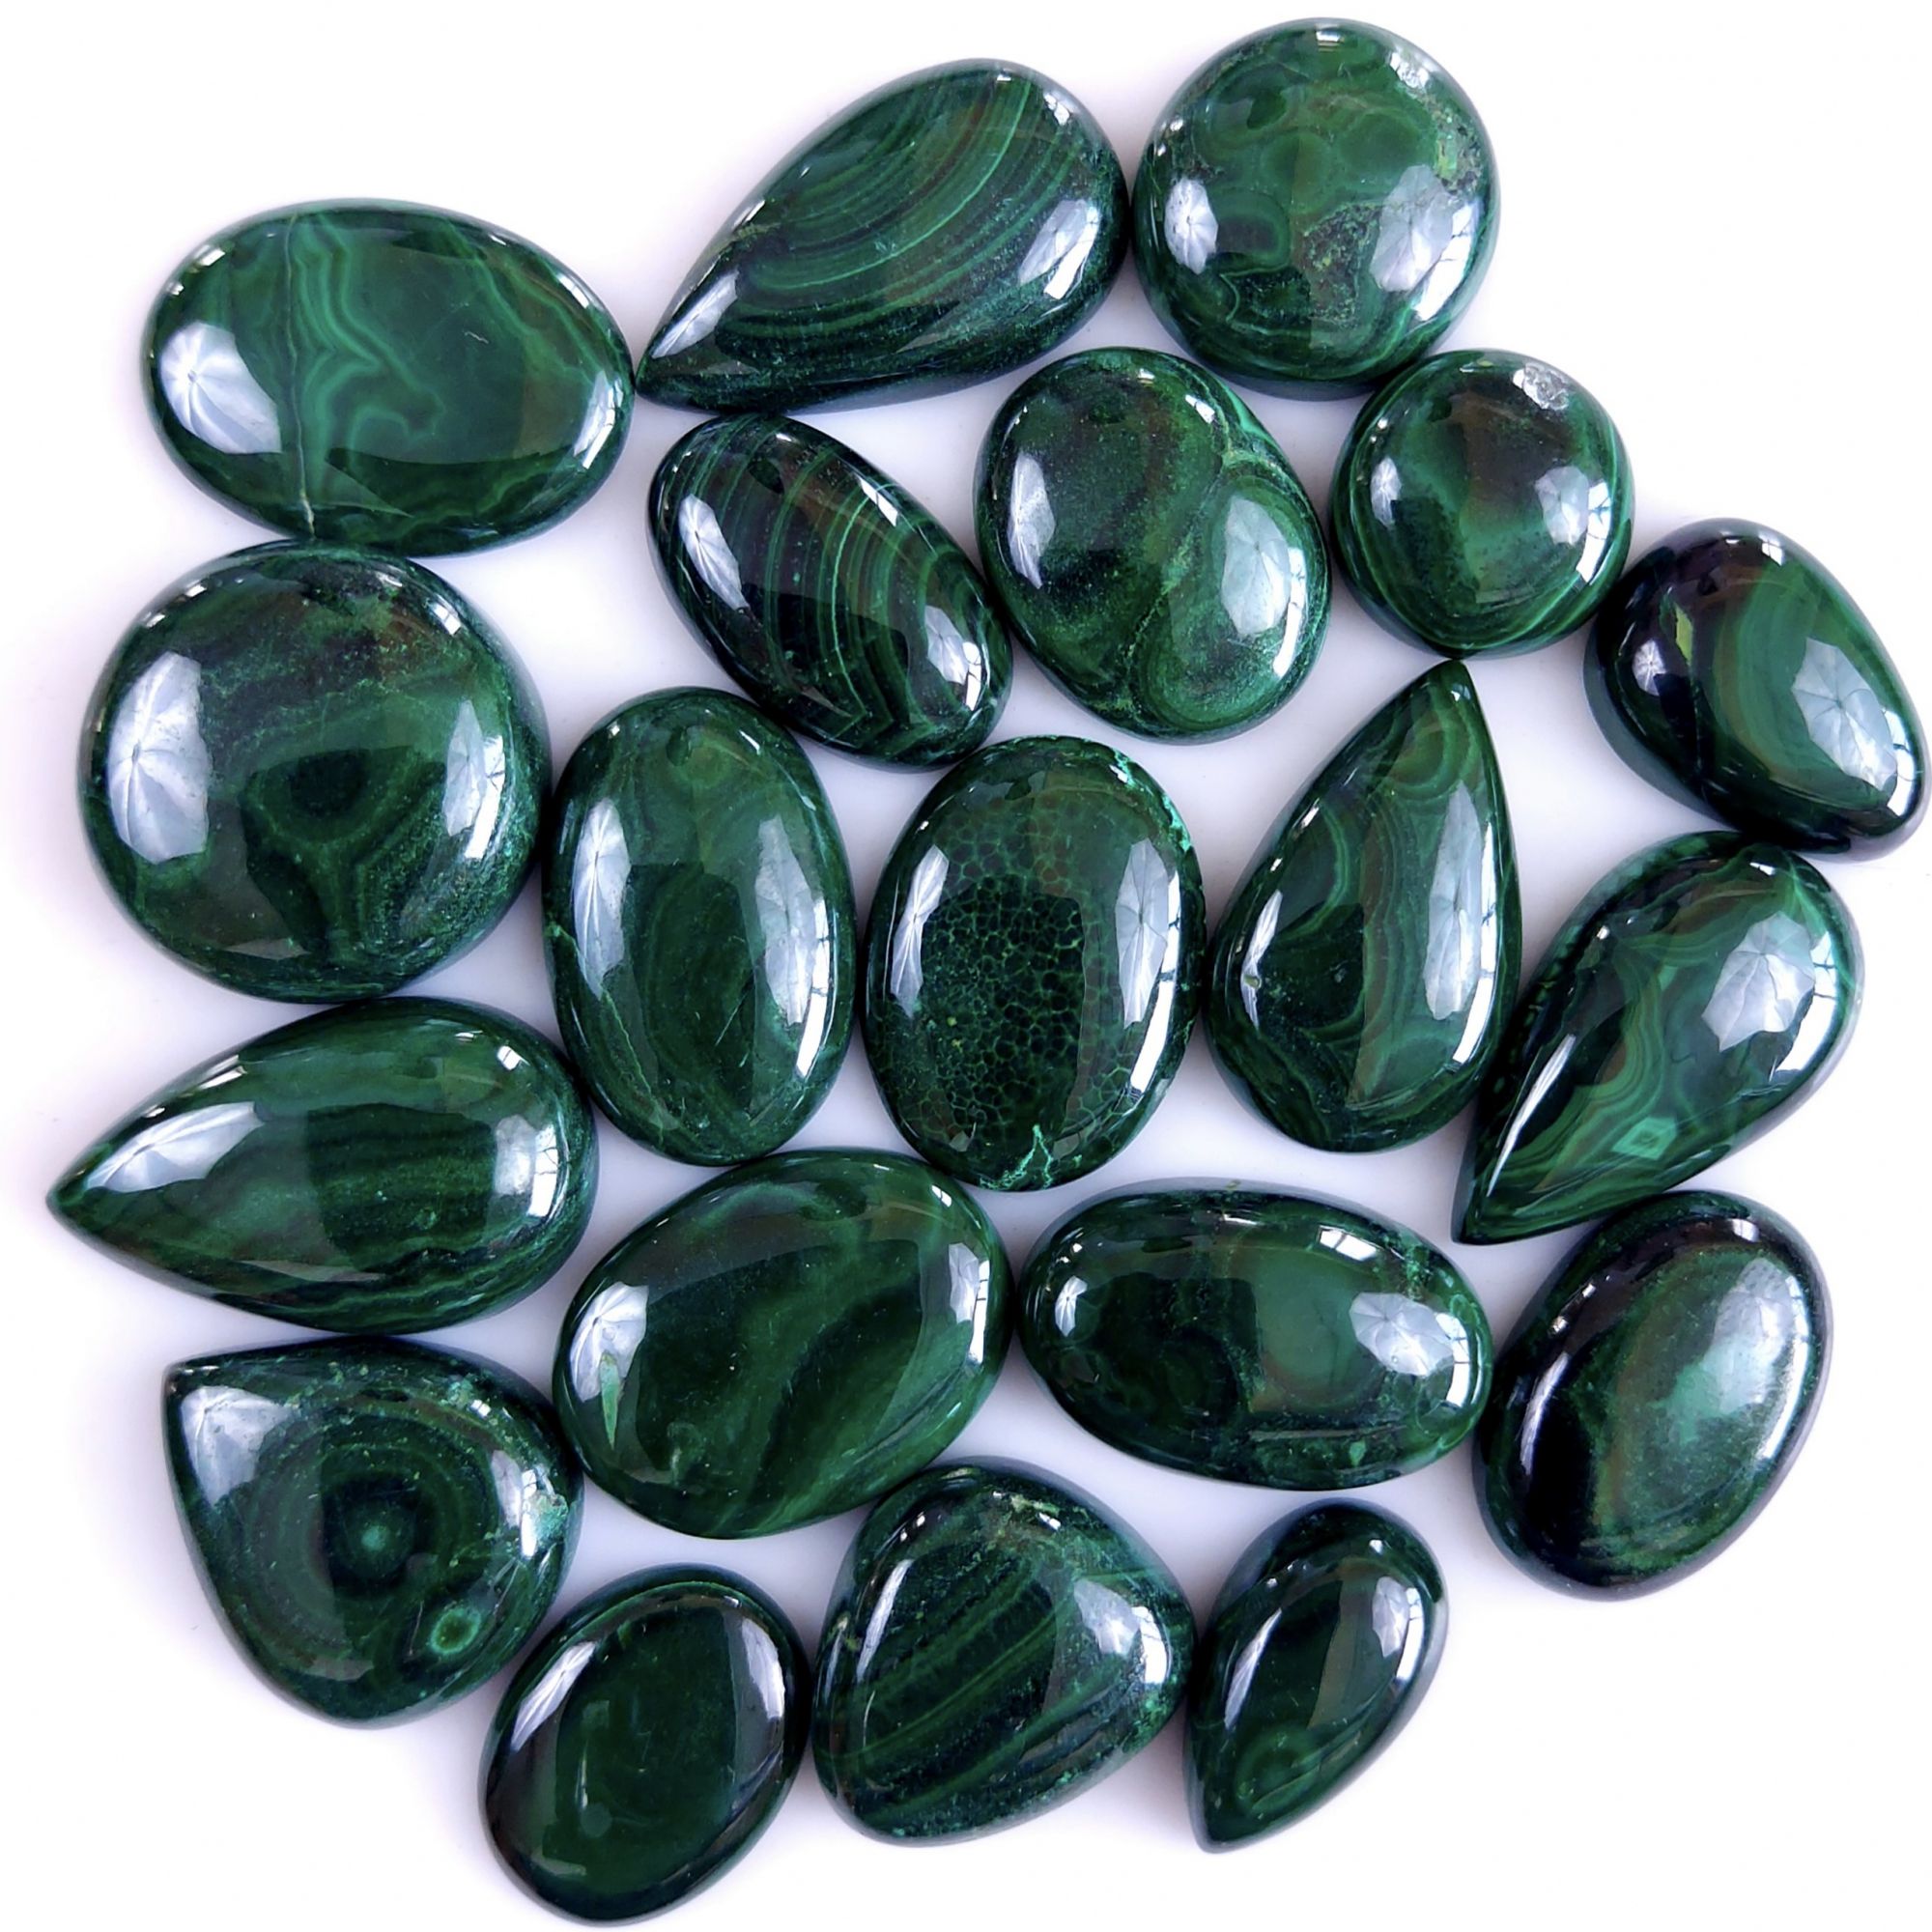 20Pcs 403Cts Natural Green Malachite Flat Back Loose Cabochon Gemstone For Handmade Jewelry Making and Craft Supplies 18x18 15x7mm#9334